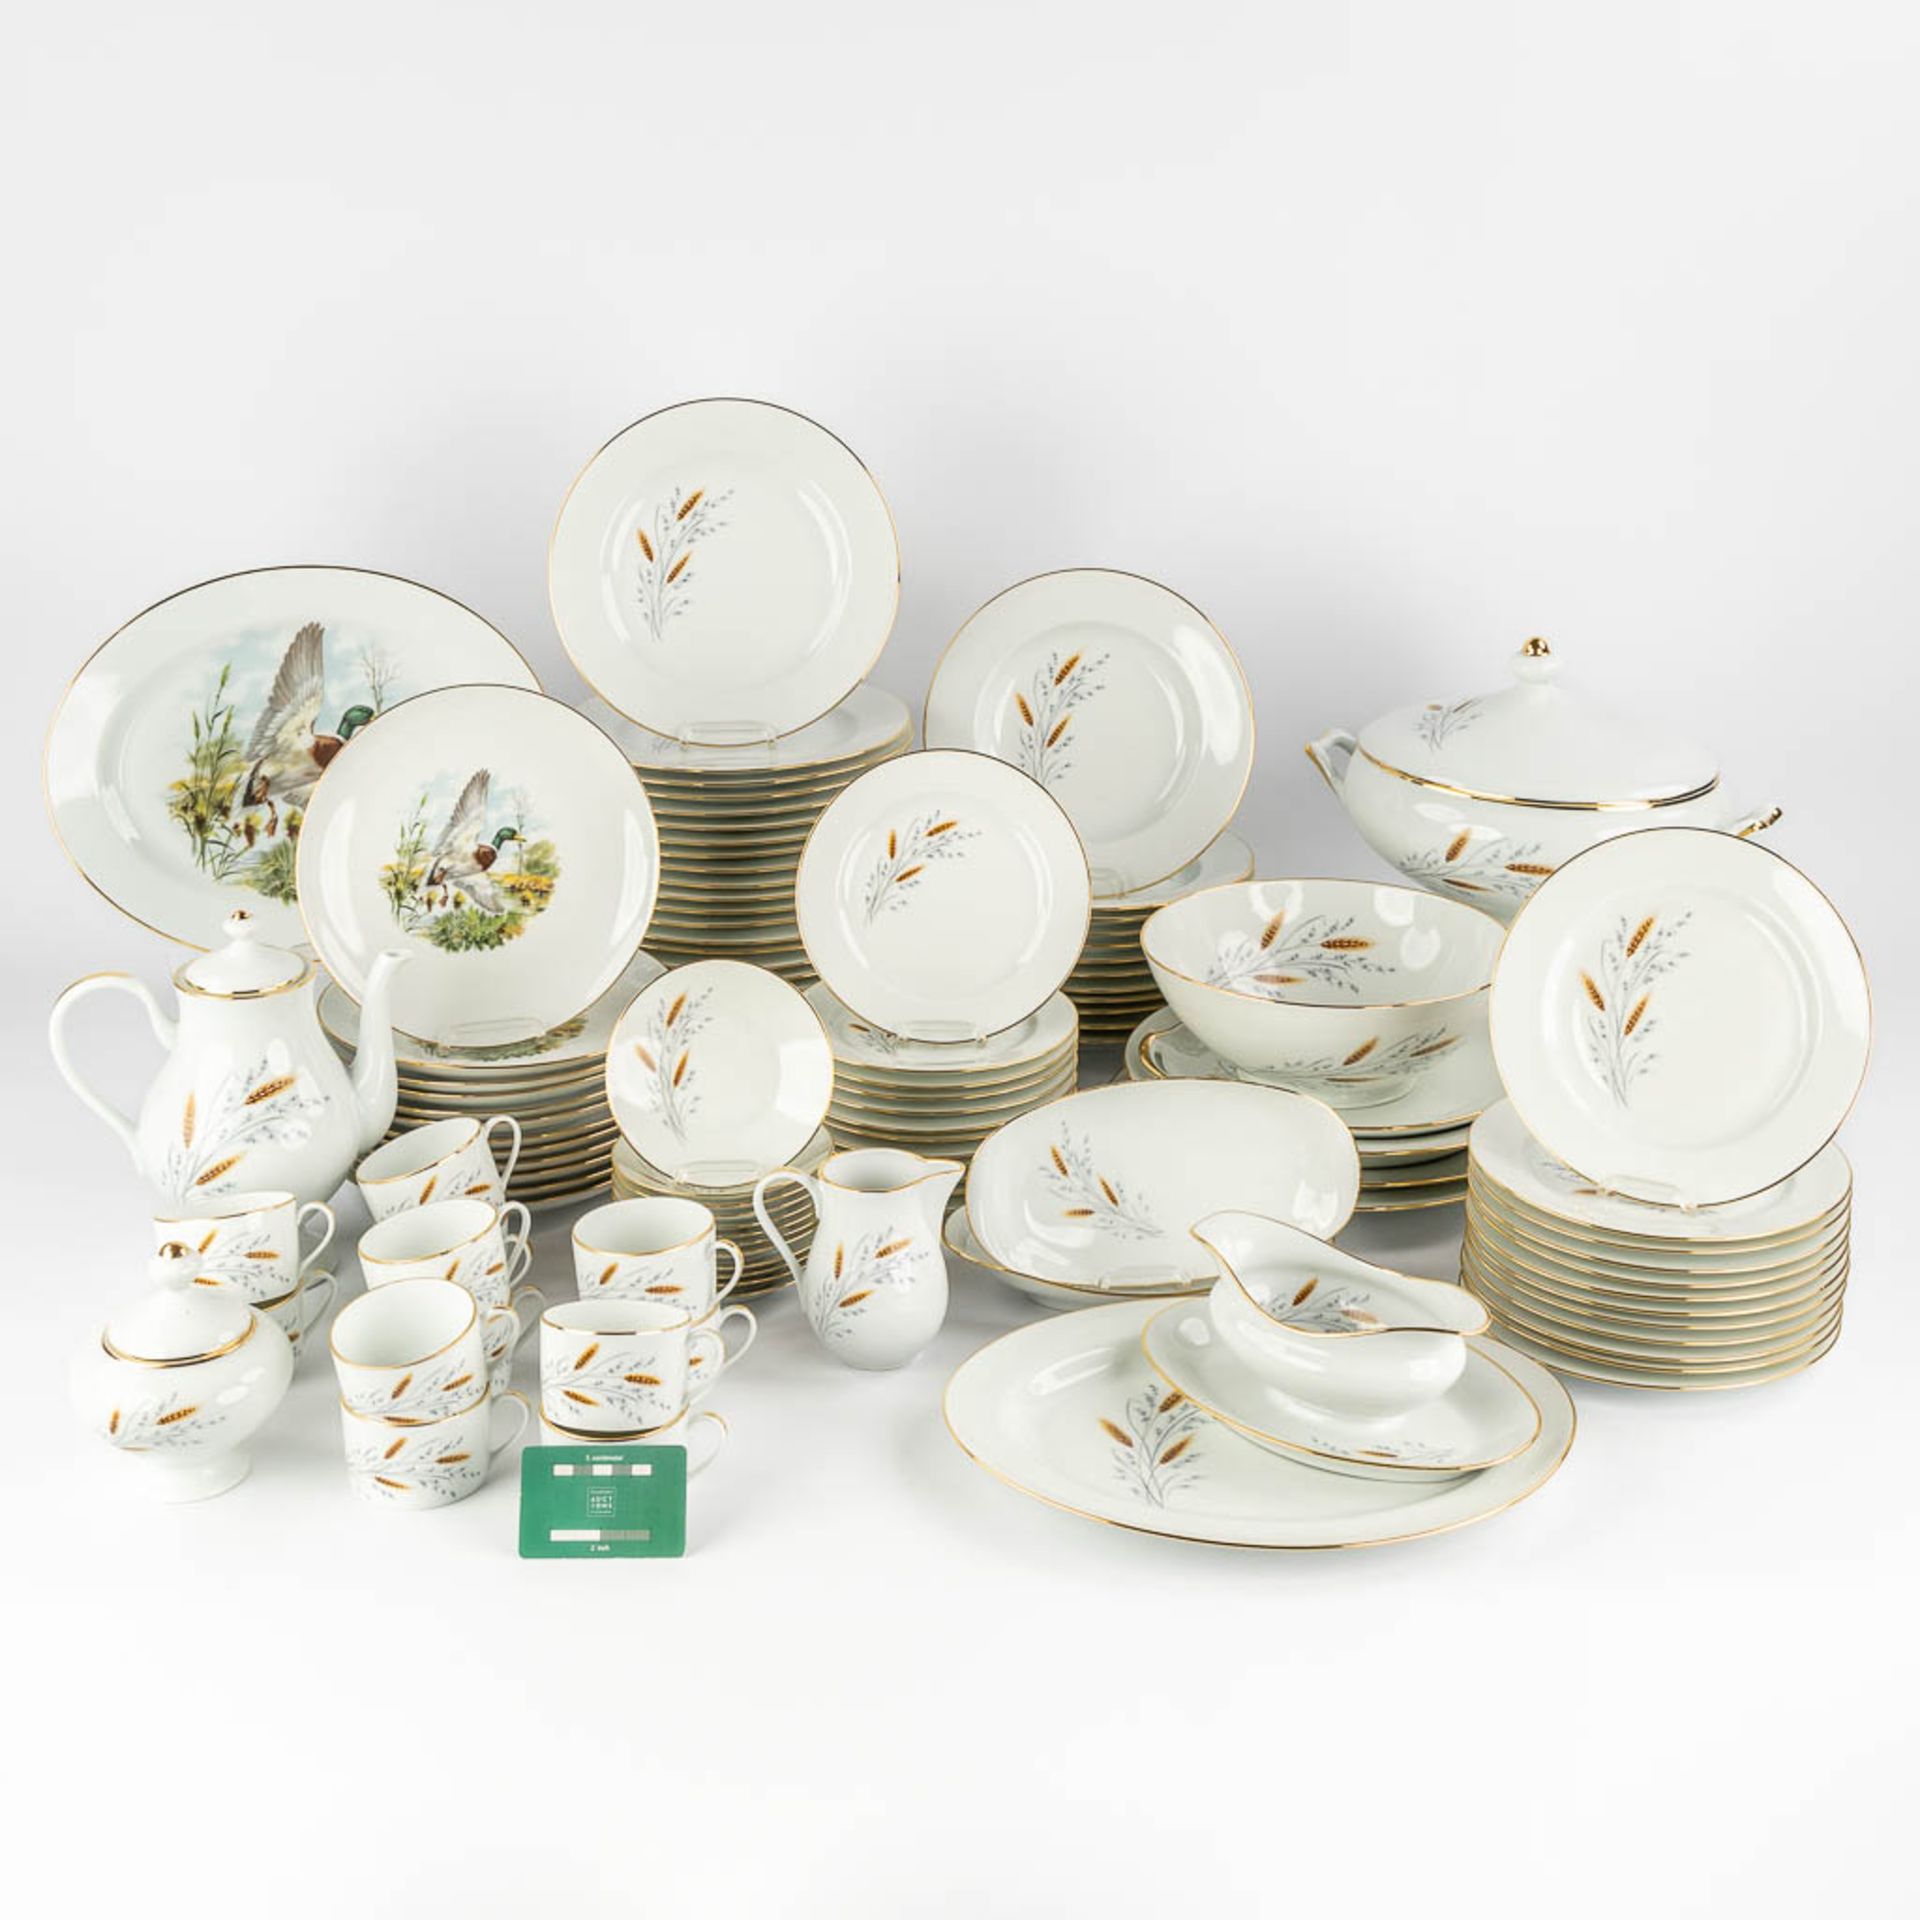 Limoges, France, a large, 12-person dinner, wild and coffee service. (L:23 x W:34 x H:22 cm) - Image 2 of 28